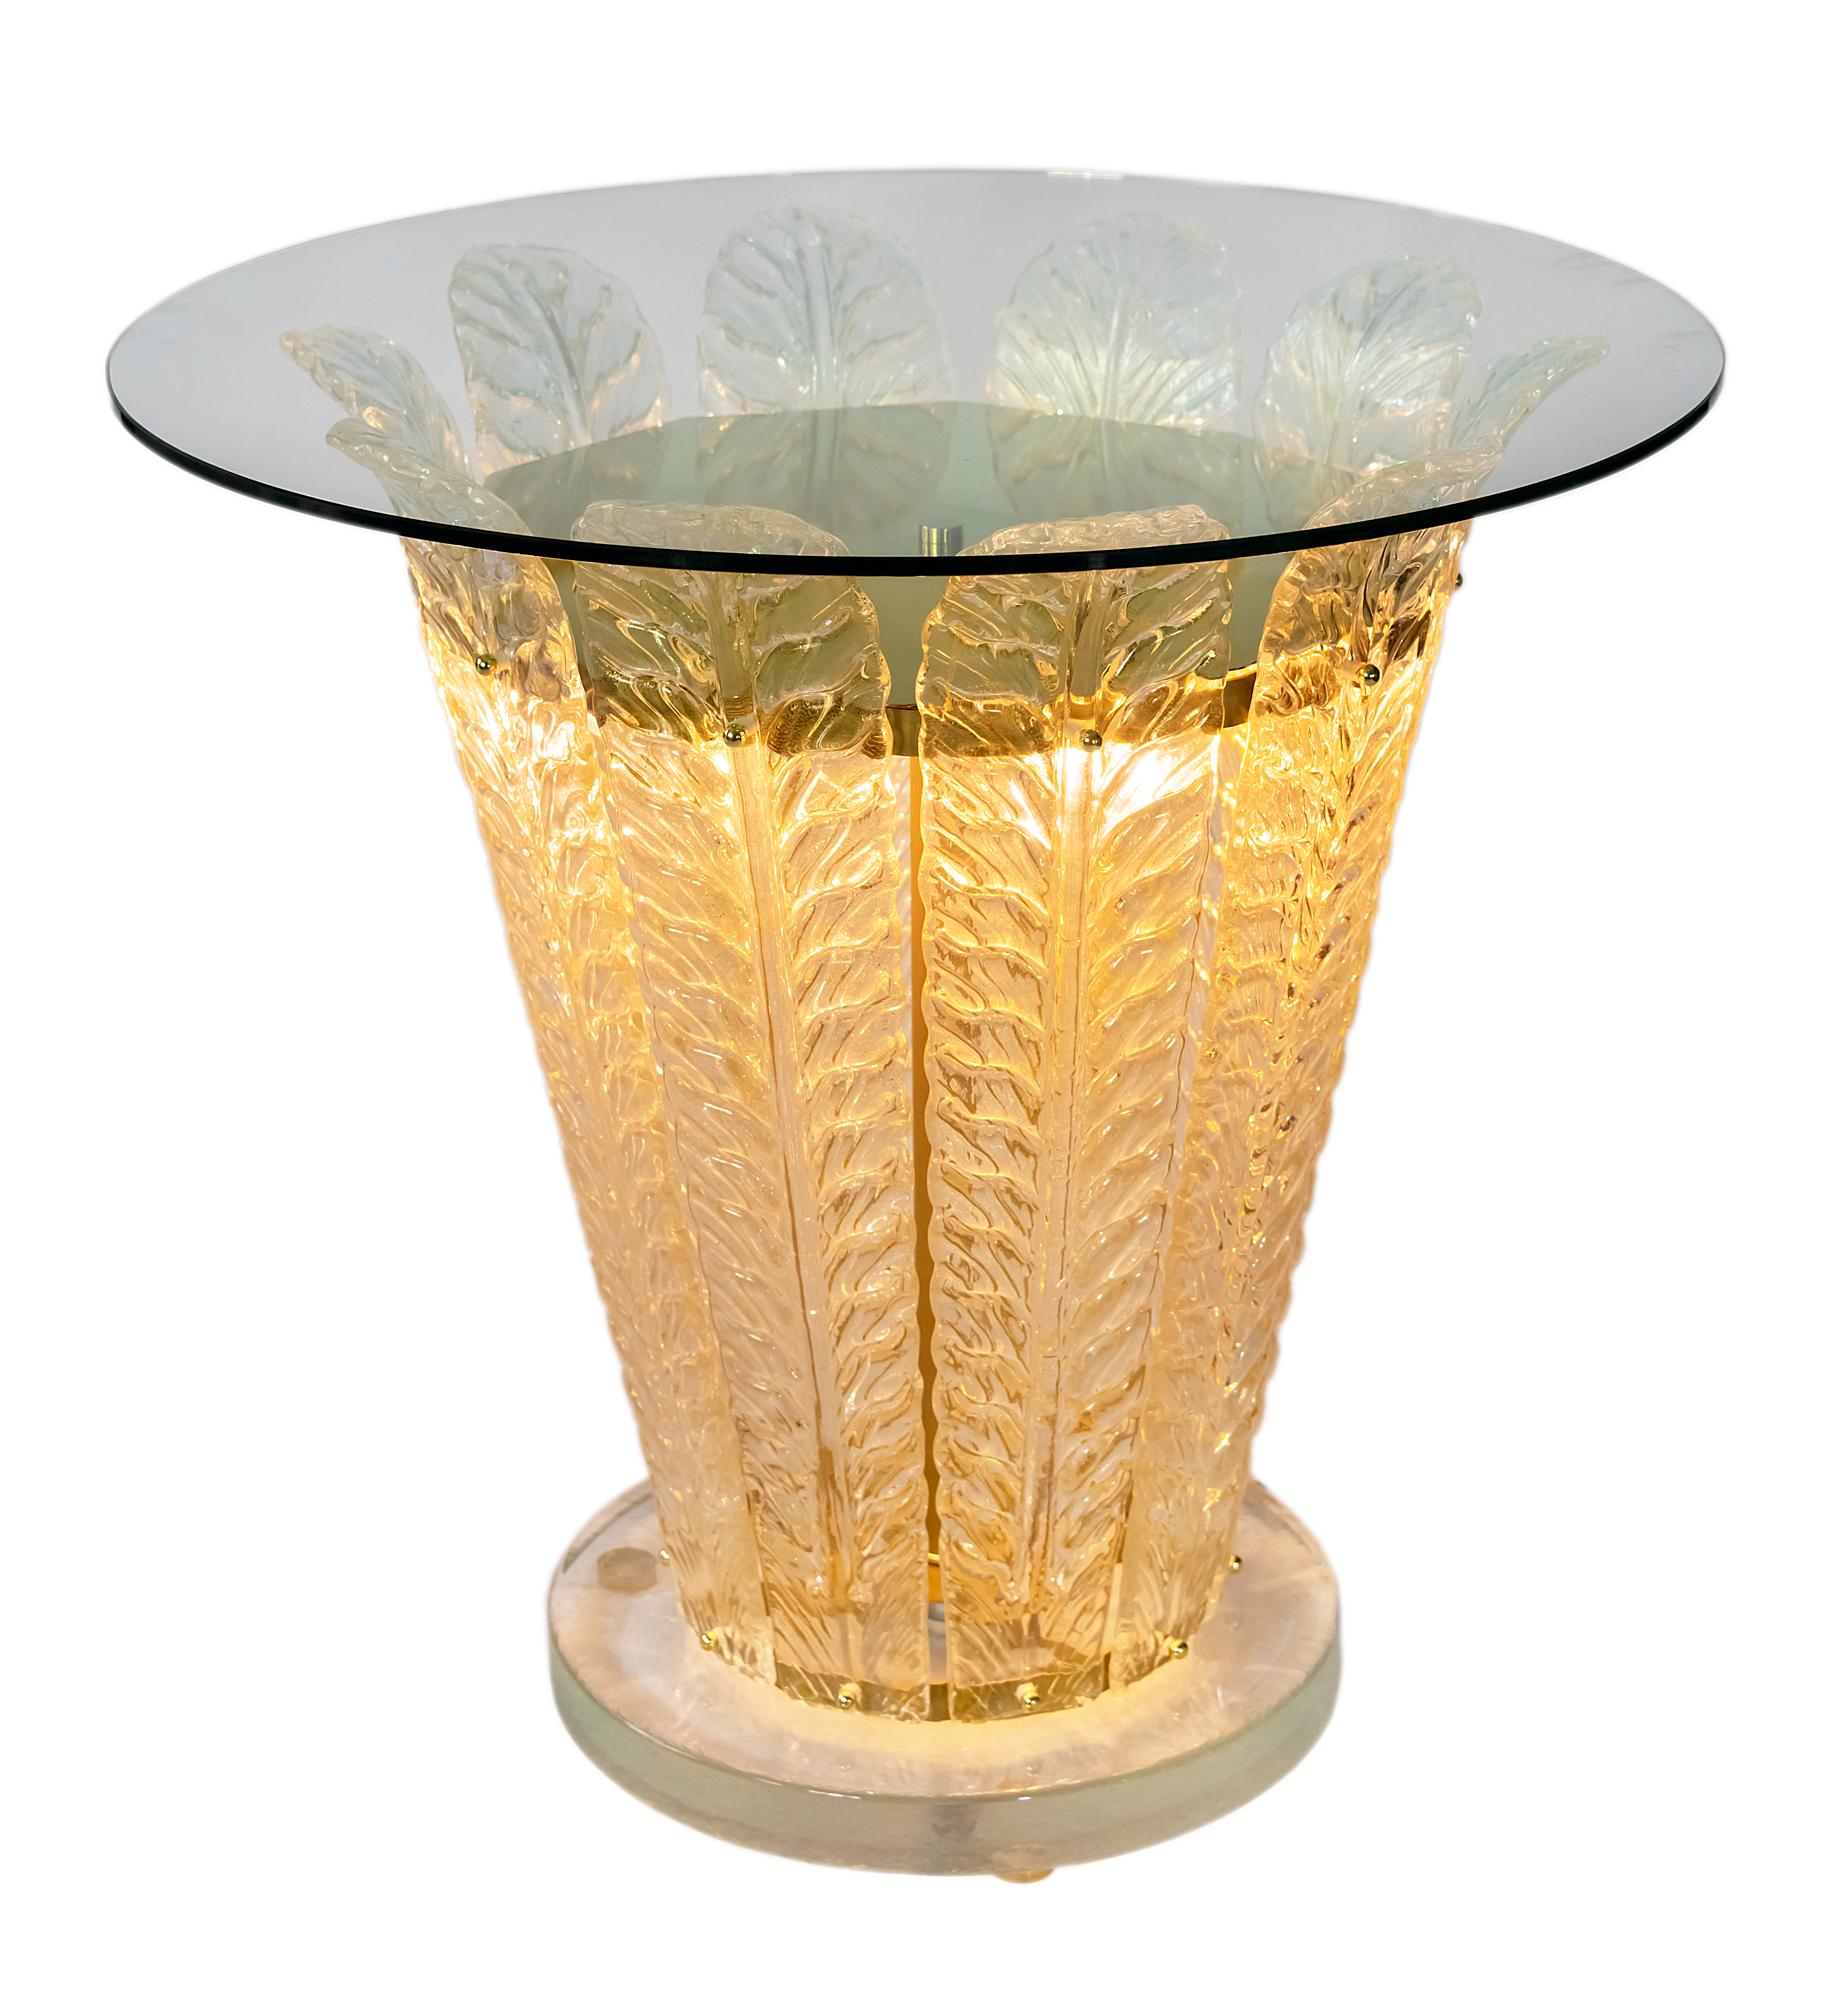 This side table is illuminated as created with the lighting function inside.
The base is a very thick solid glass, decorated with handmade Murano glass leaf form details and tempered glass top.
The are 3 pcs. of E27 bulbs inside.
 